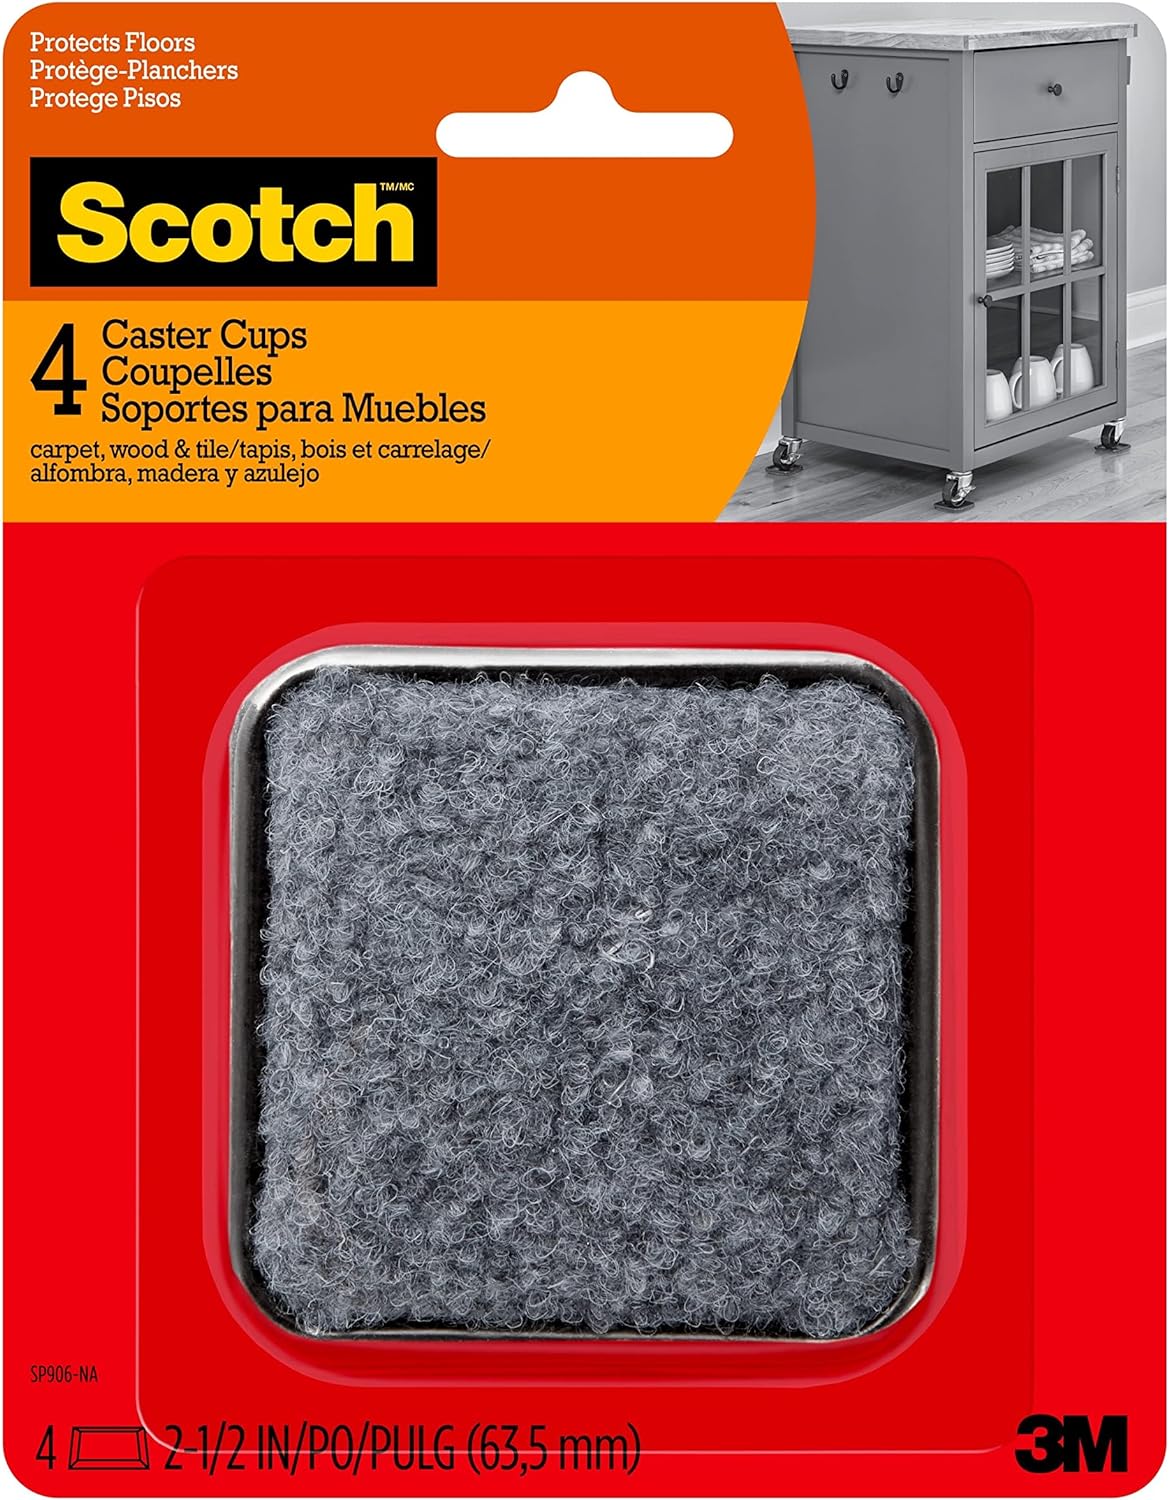 Scotch Caster Cups, Square Felt Gray 2.5-in 4/pk, Chair Leg Floor Protectors, Furniture Pads for Hardwoods Floors